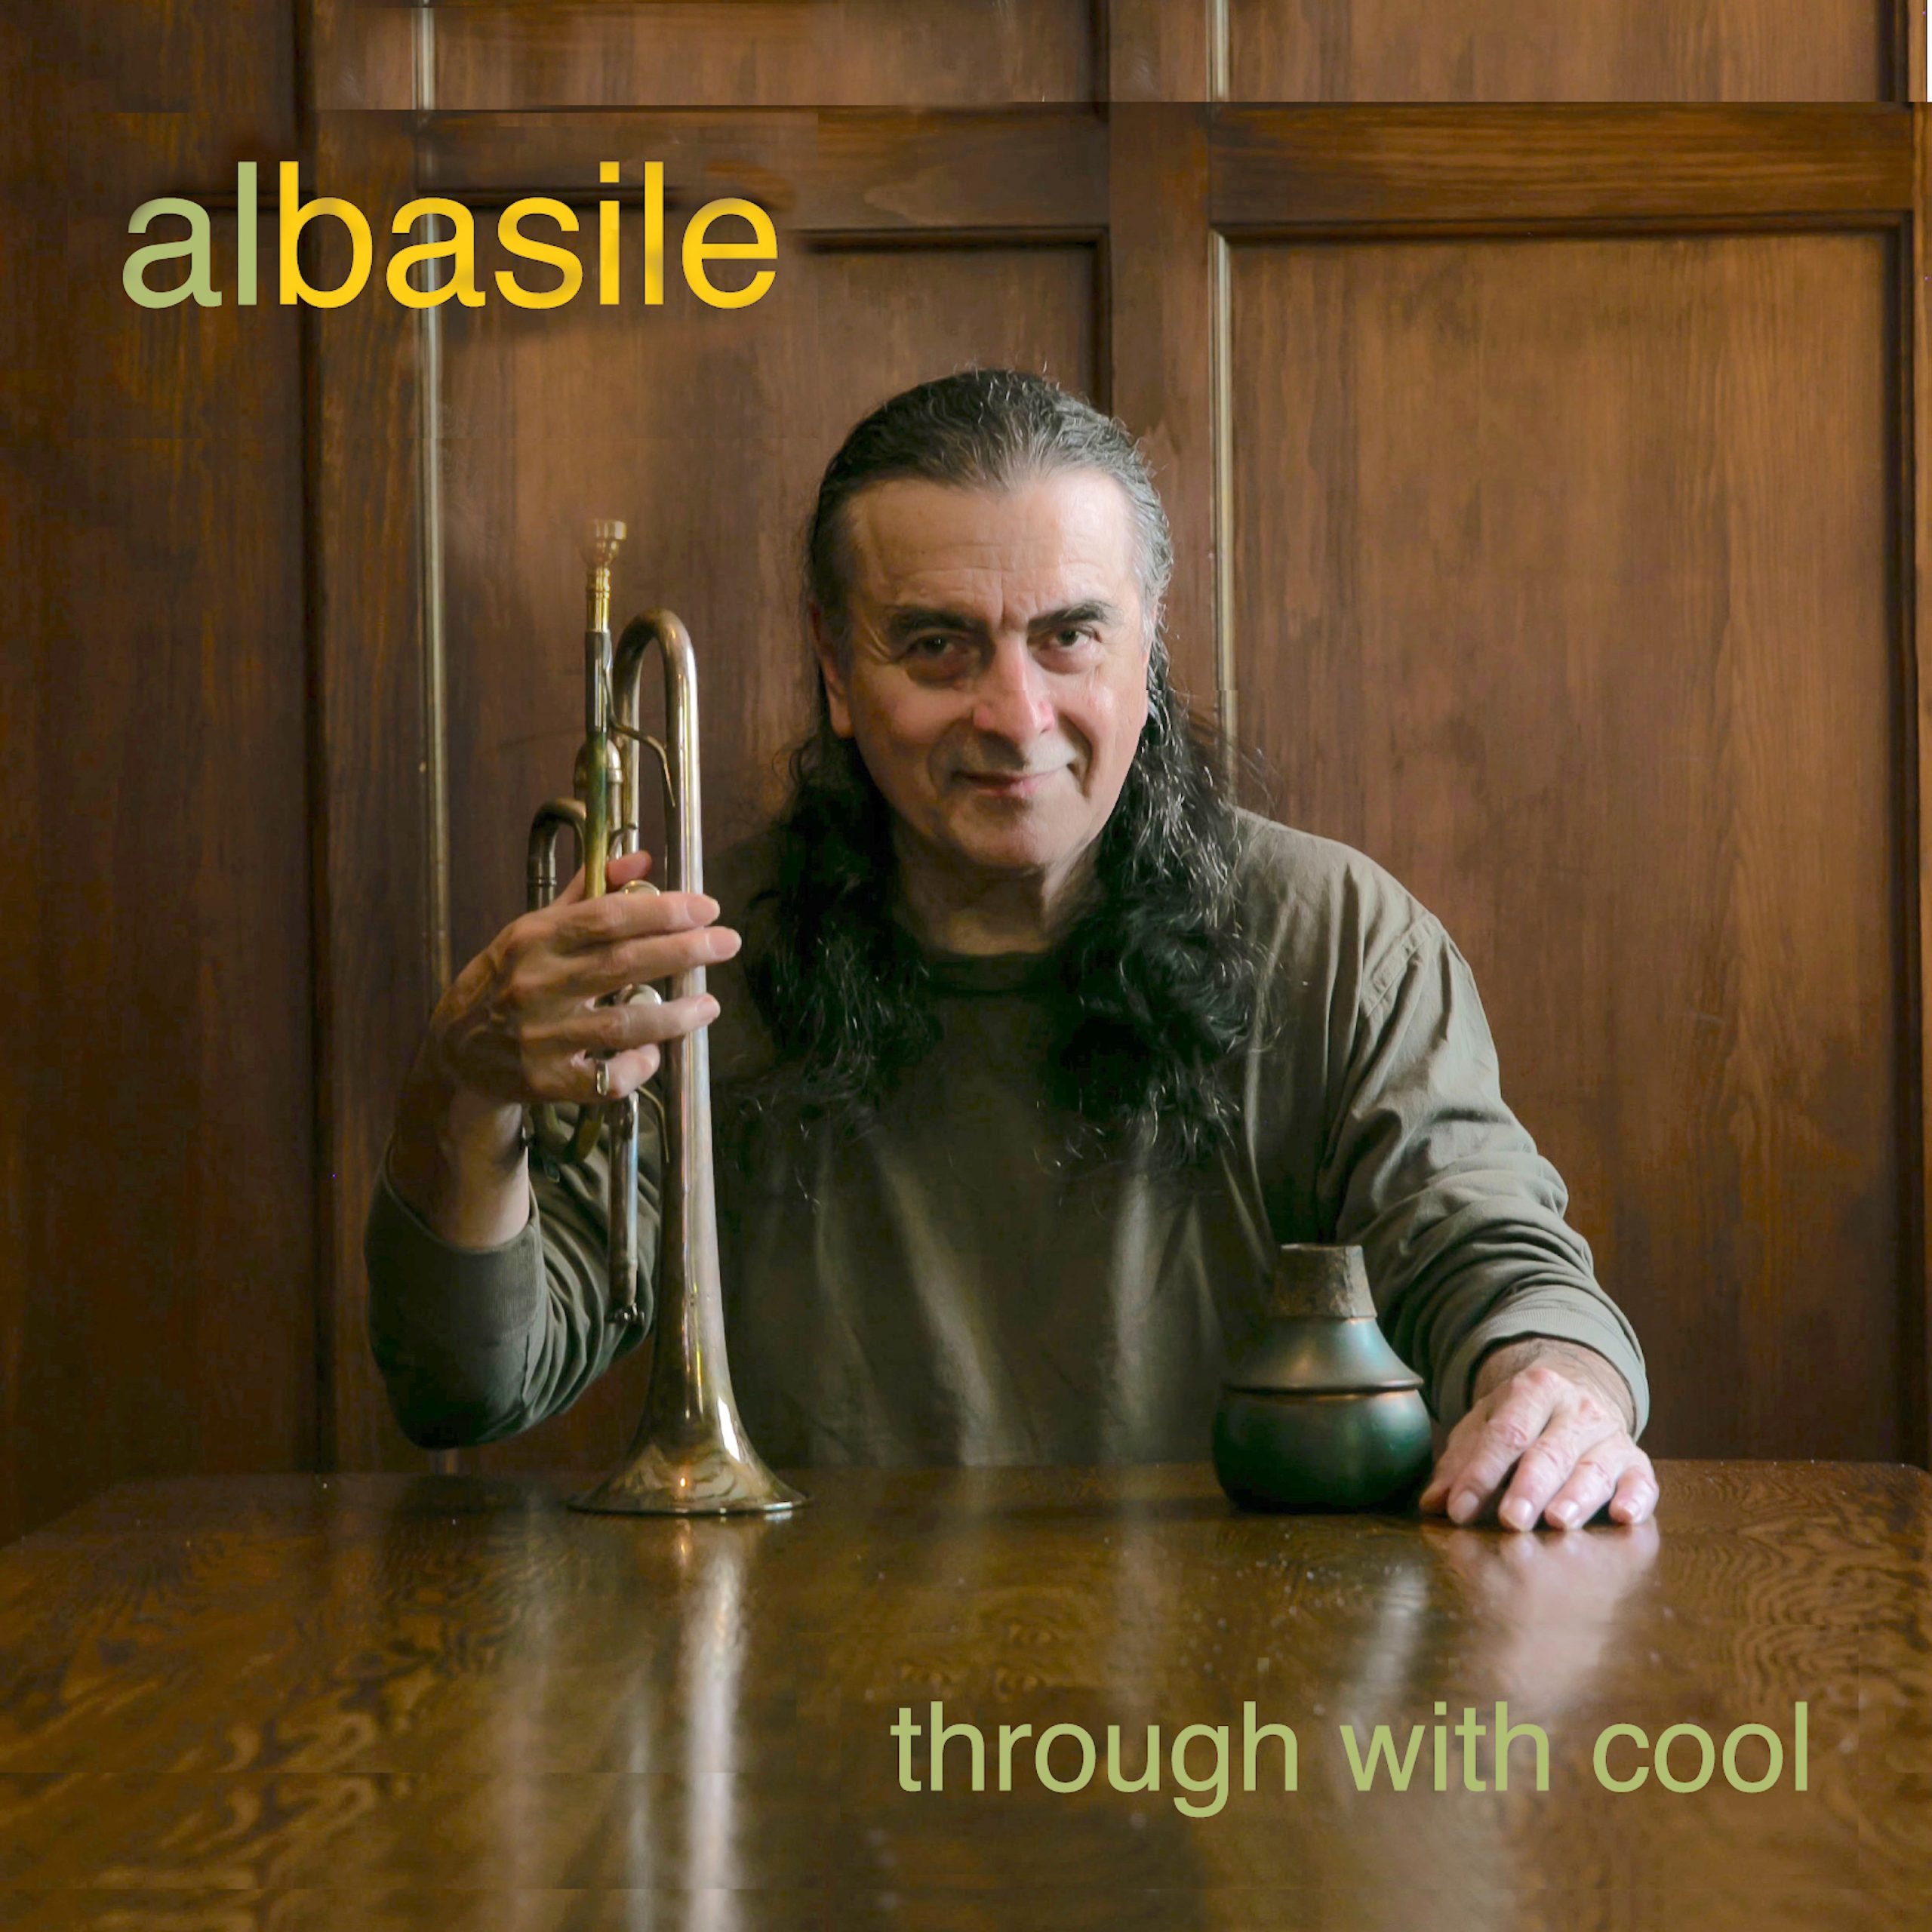 Al Basile Is "Through with Cool" on His New Blues/Roots CD Due August 19